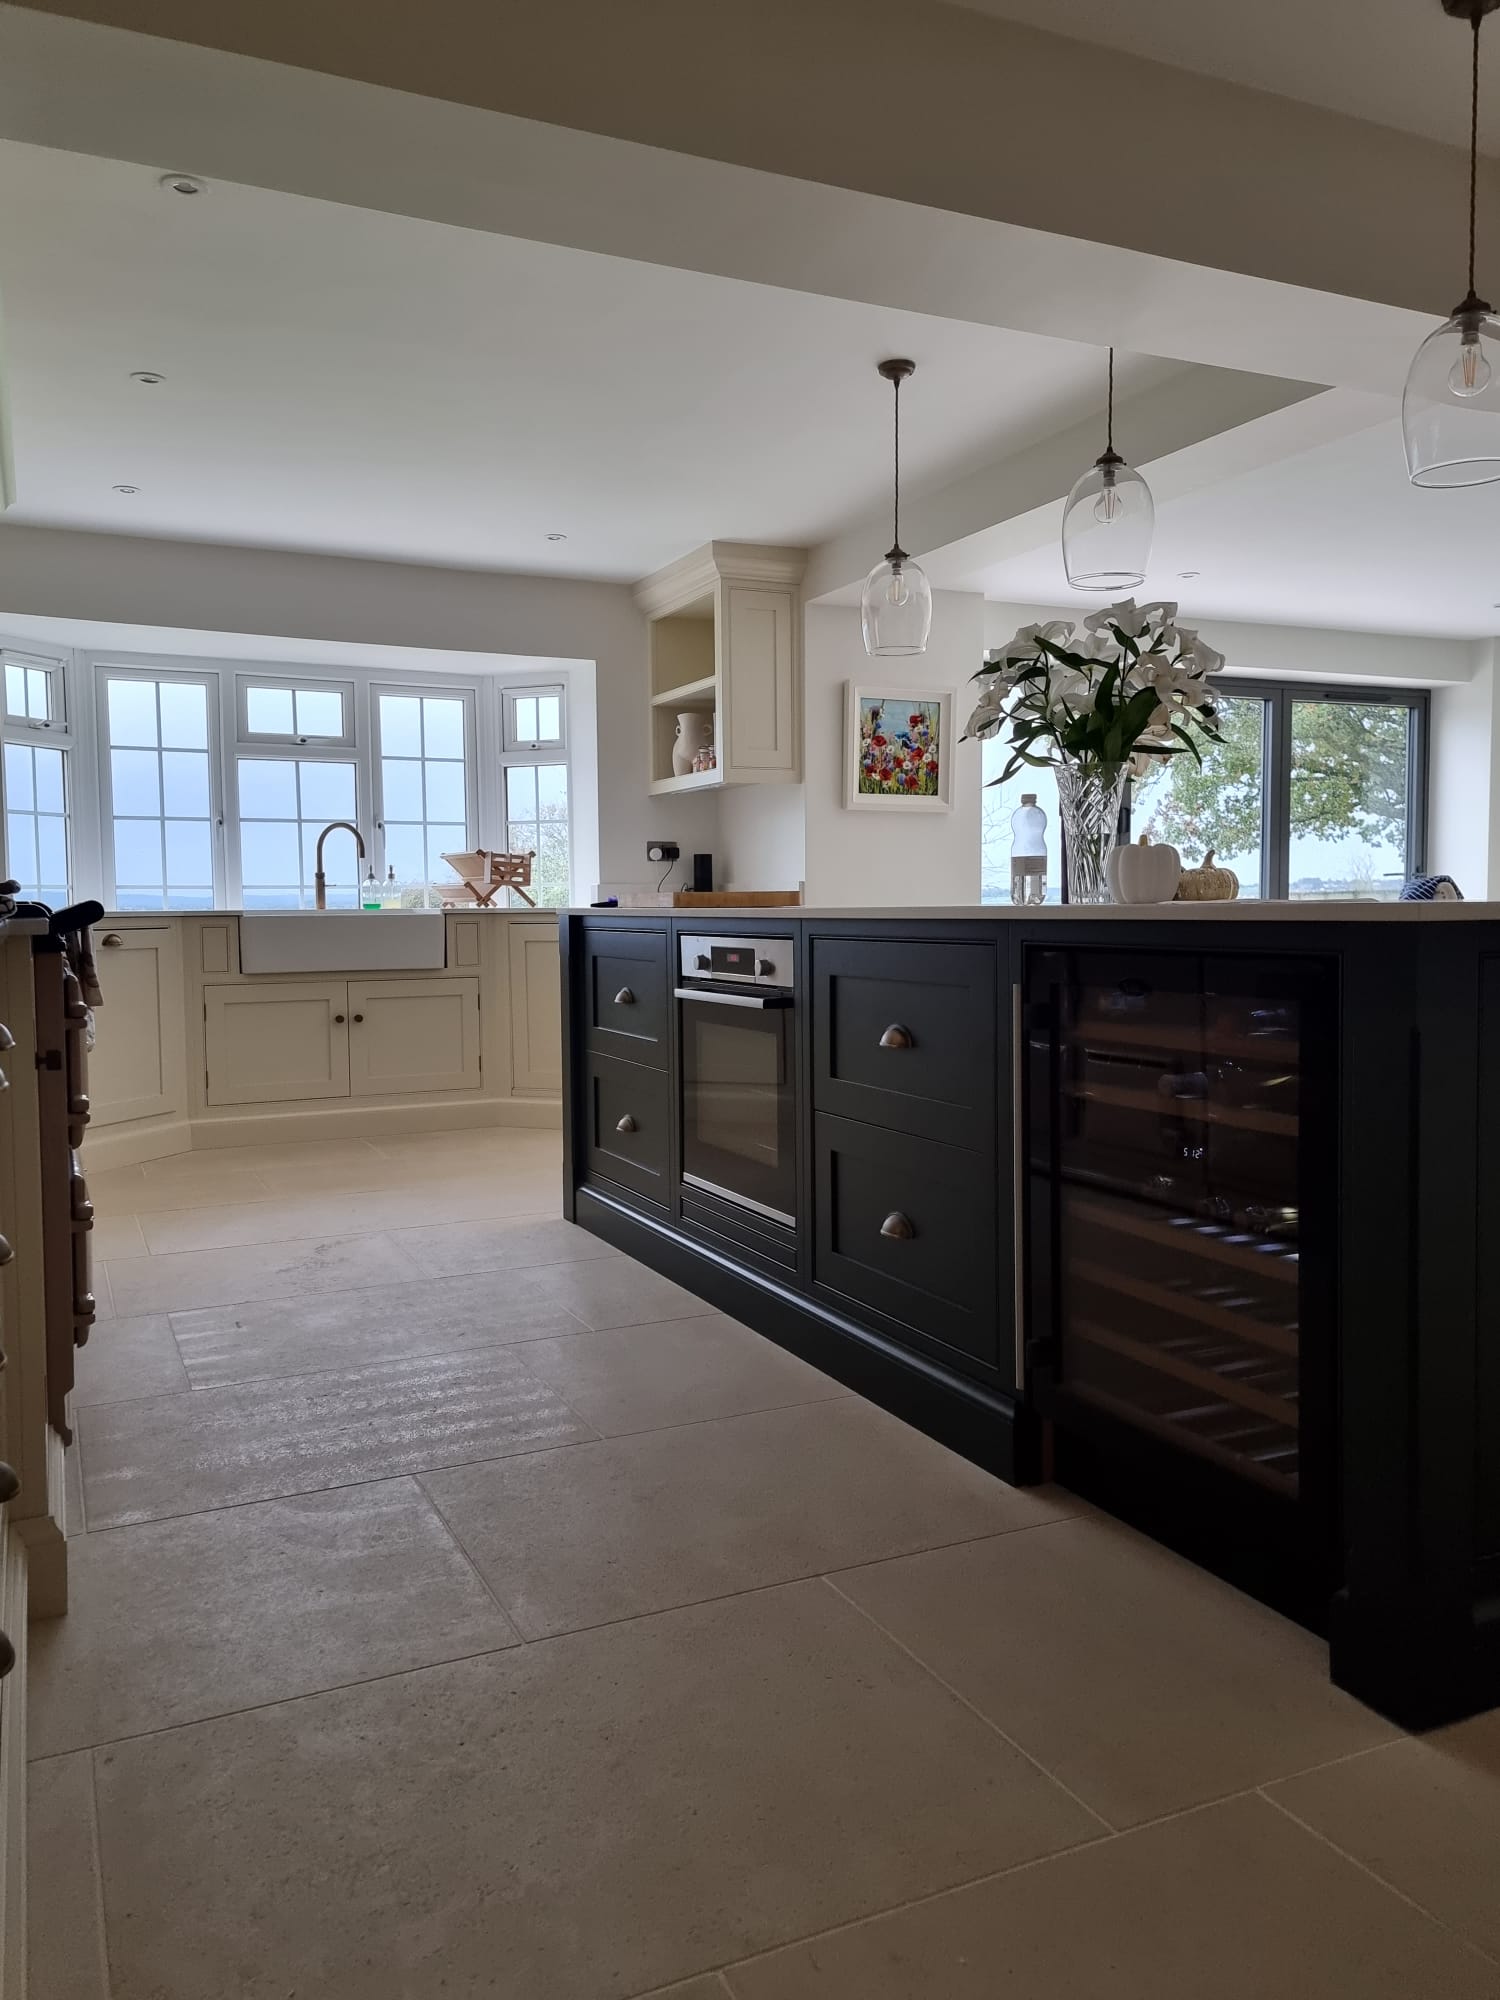 Bespoke timber kitchen island by Kings Stag Joinery